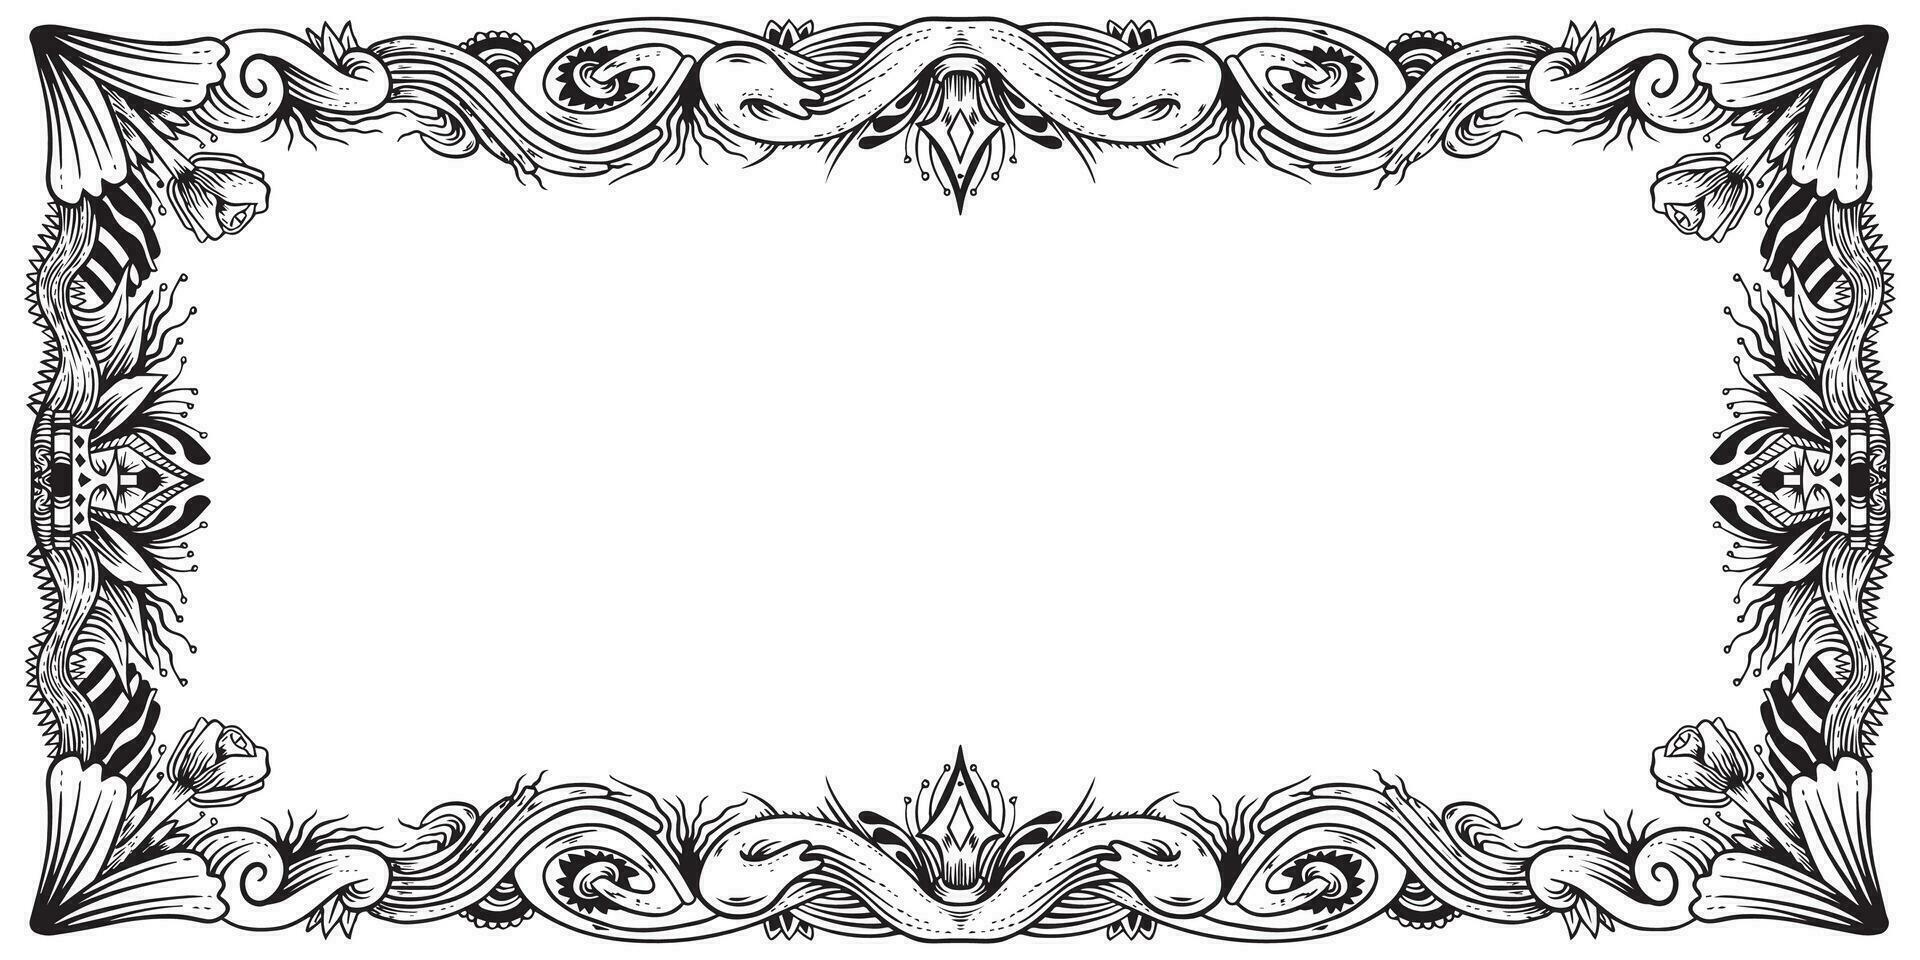 Engraving frame variant, good for graphic resources, printable art, suitable for design resources, logo, template designs, and more. vector